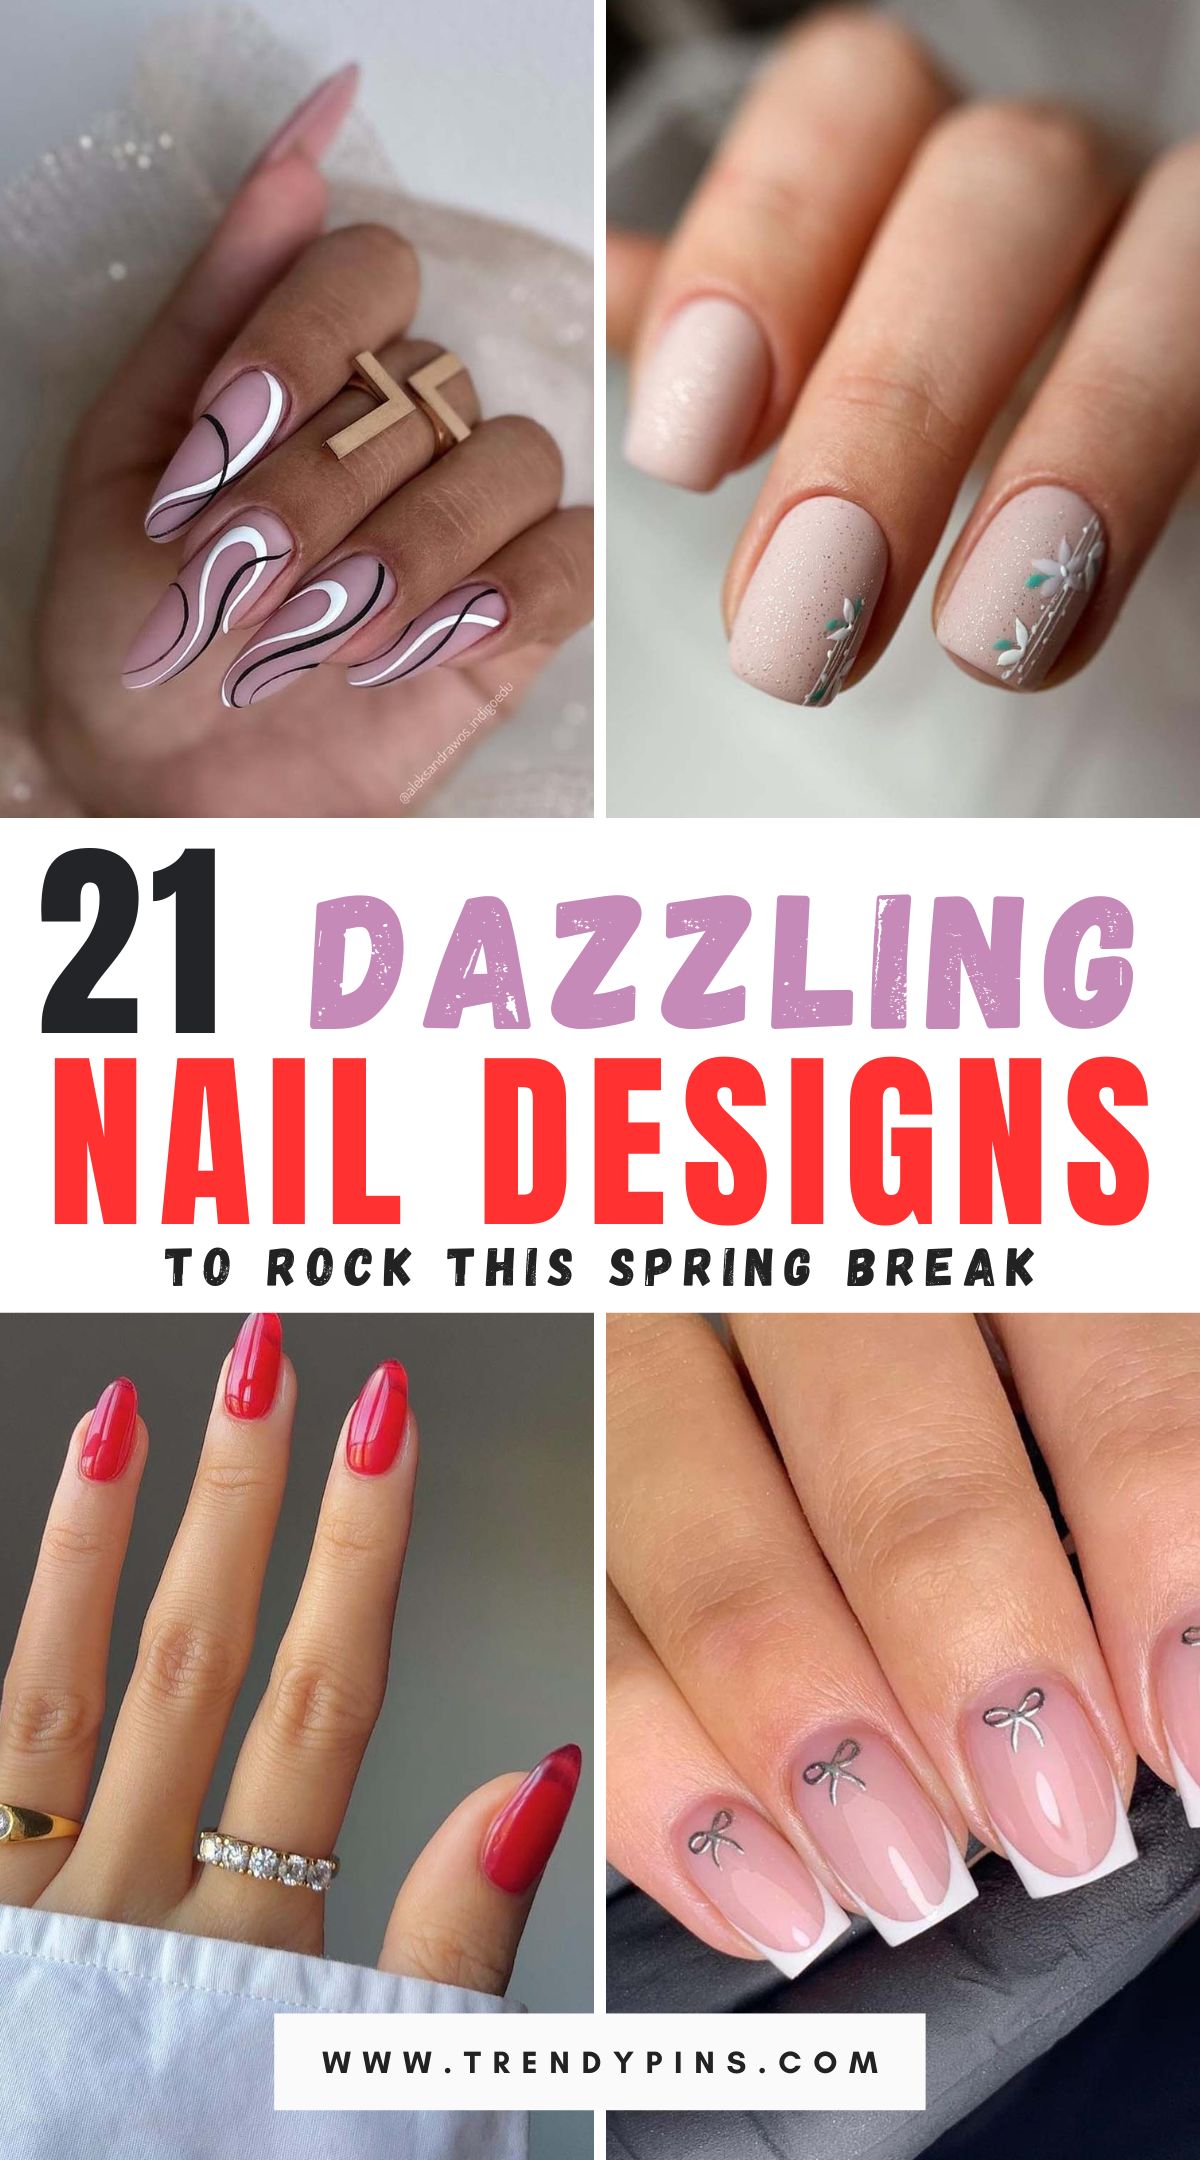 Get into vacation mode with these 21 spring break nail designs. From vibrant beach-inspired hues to playful tropical motifs, explore fun and festive nail art ideas that will complement your vacation vibes and add a touch of flair to your getaway.